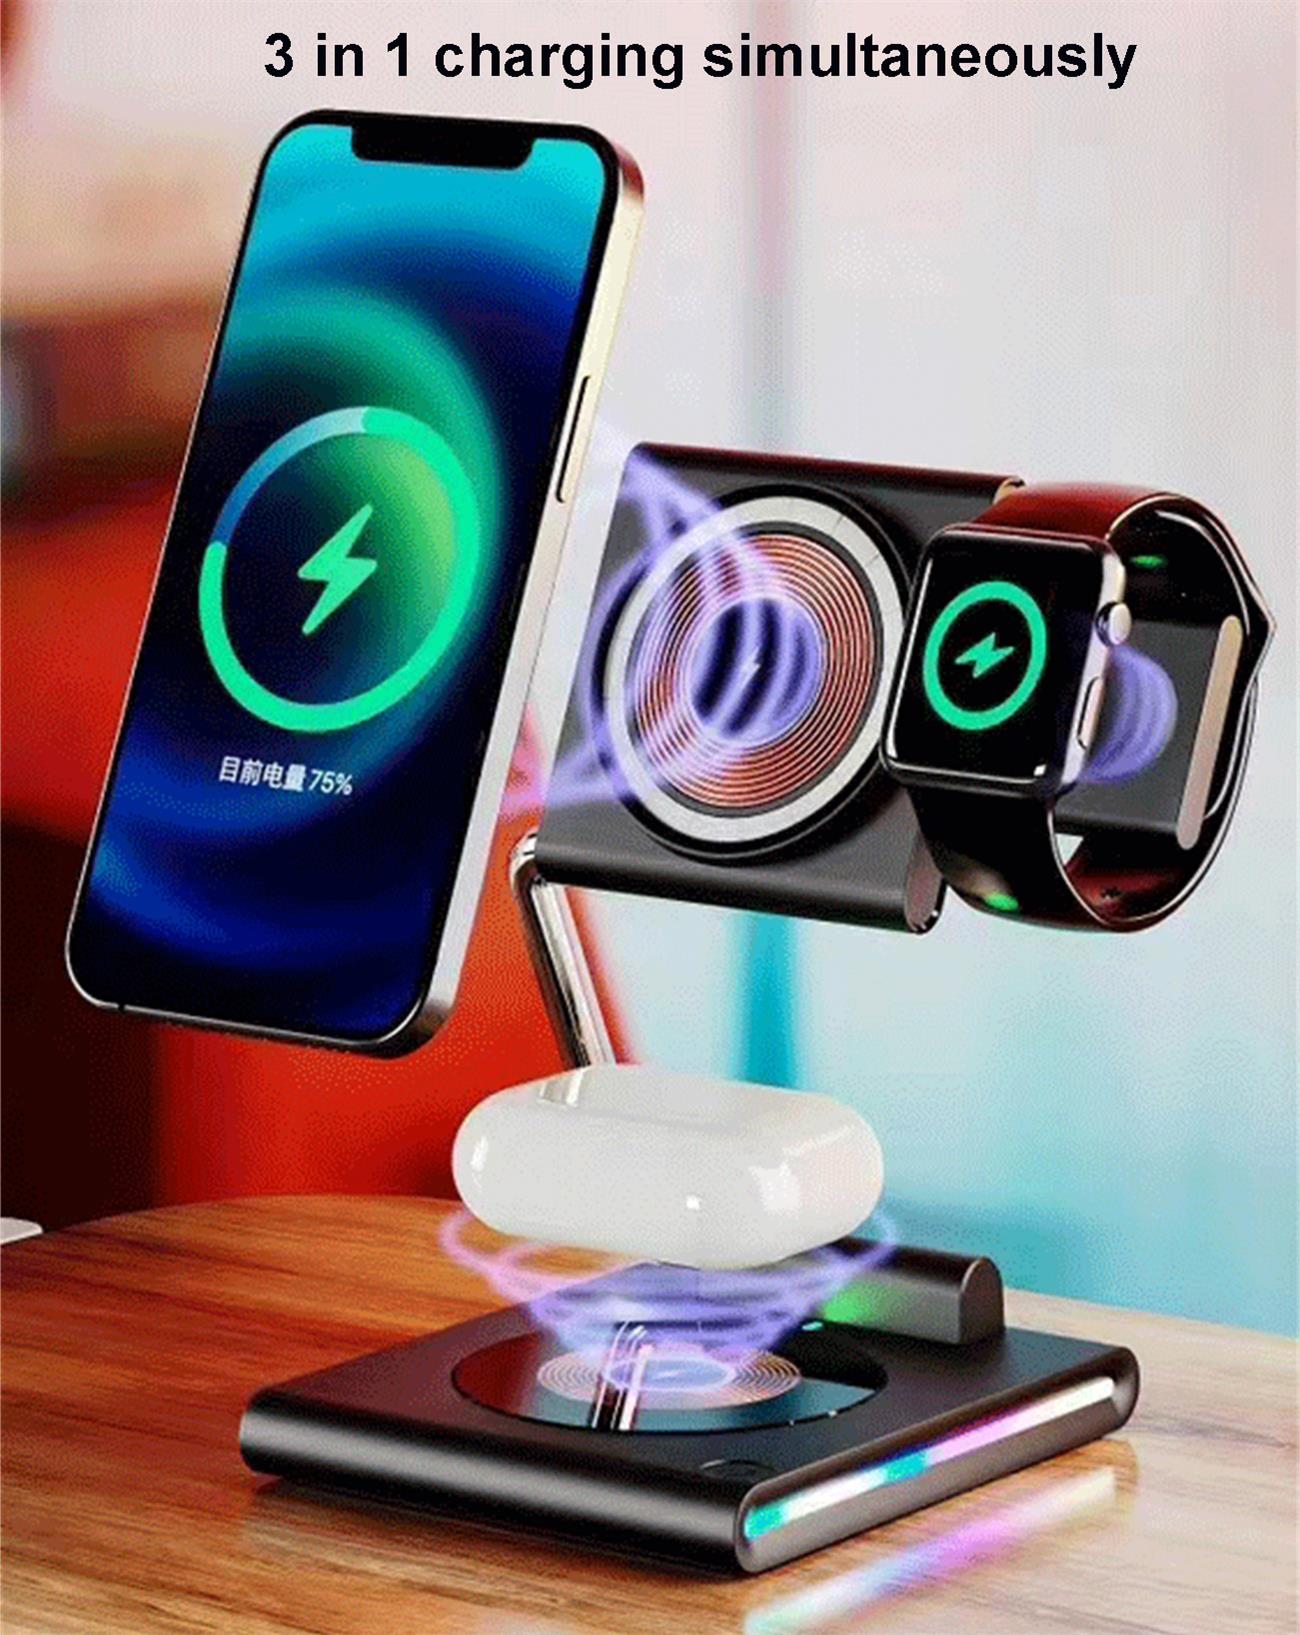 Magnetic Wireless Charger Foldable 3 In 1 Multifunction For Apple And Samsung Phone Apple Watch Airpod